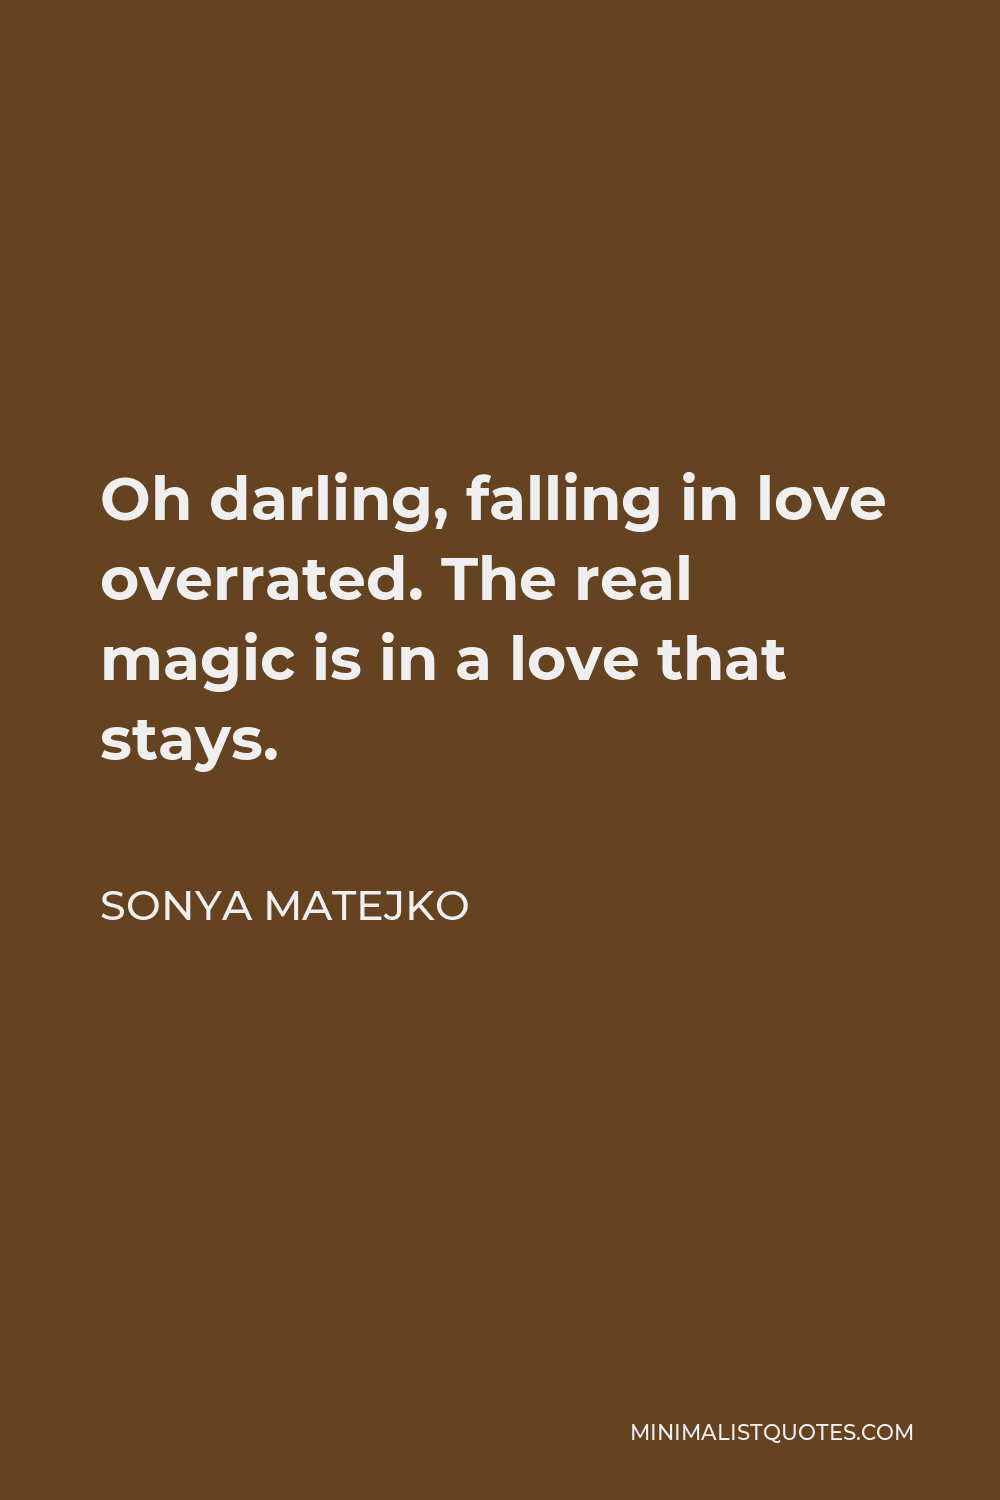 Sonya Matejko Quote - Oh darling, falling in love overrated. The real magic is in a love that stays.